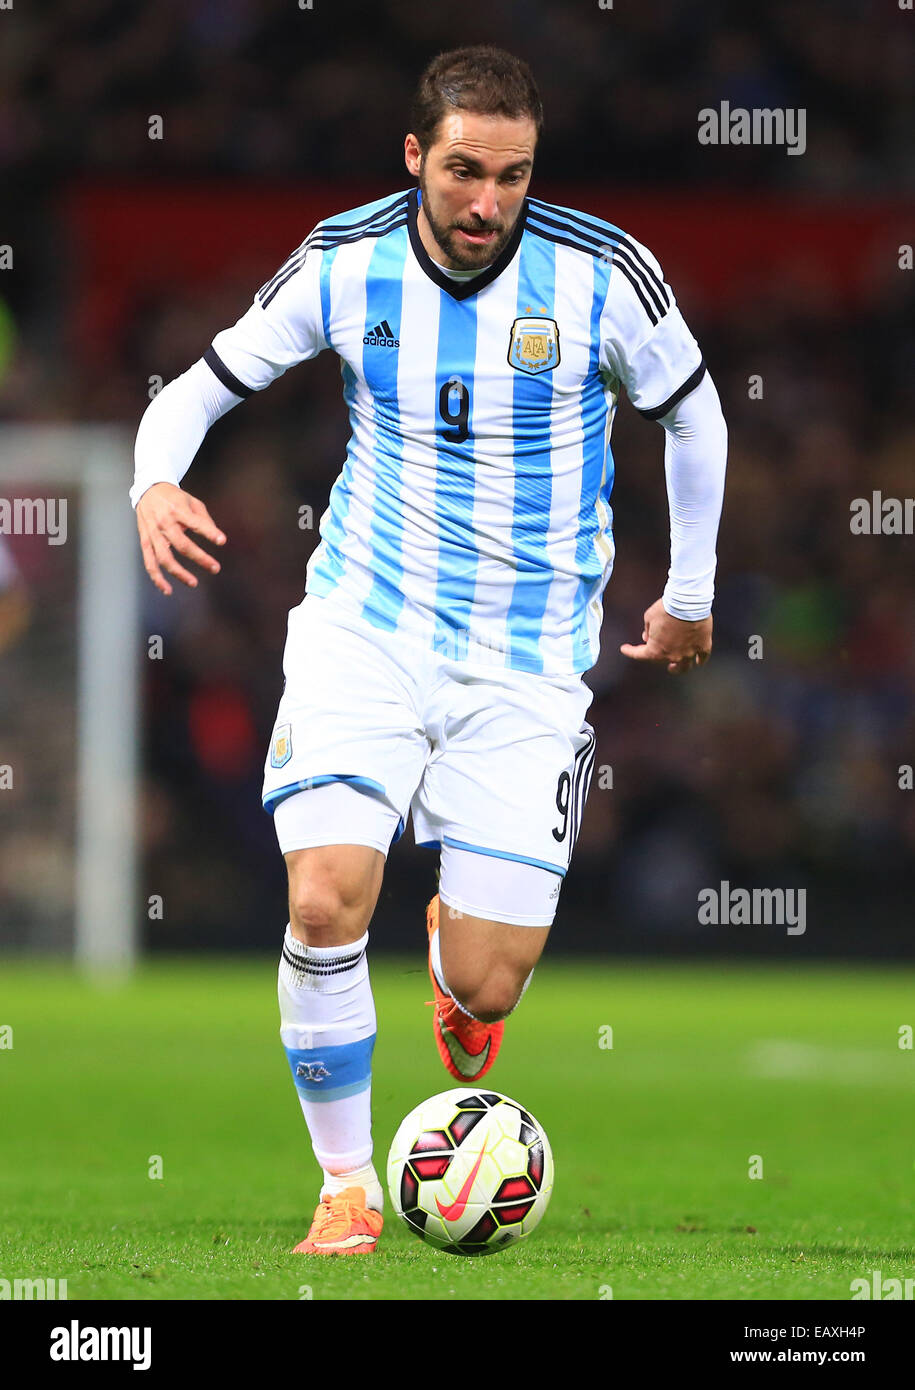 Manchester, UK. 18th Nov, 2014. Gonzalo Higuain of Argentina - Argentina vs. Portugal - International Friendly - Old Trafford - Manchester - 18/11/2014 Pic Philip Oldham/Sportimage © csm/Alamy Live News Stock Photo